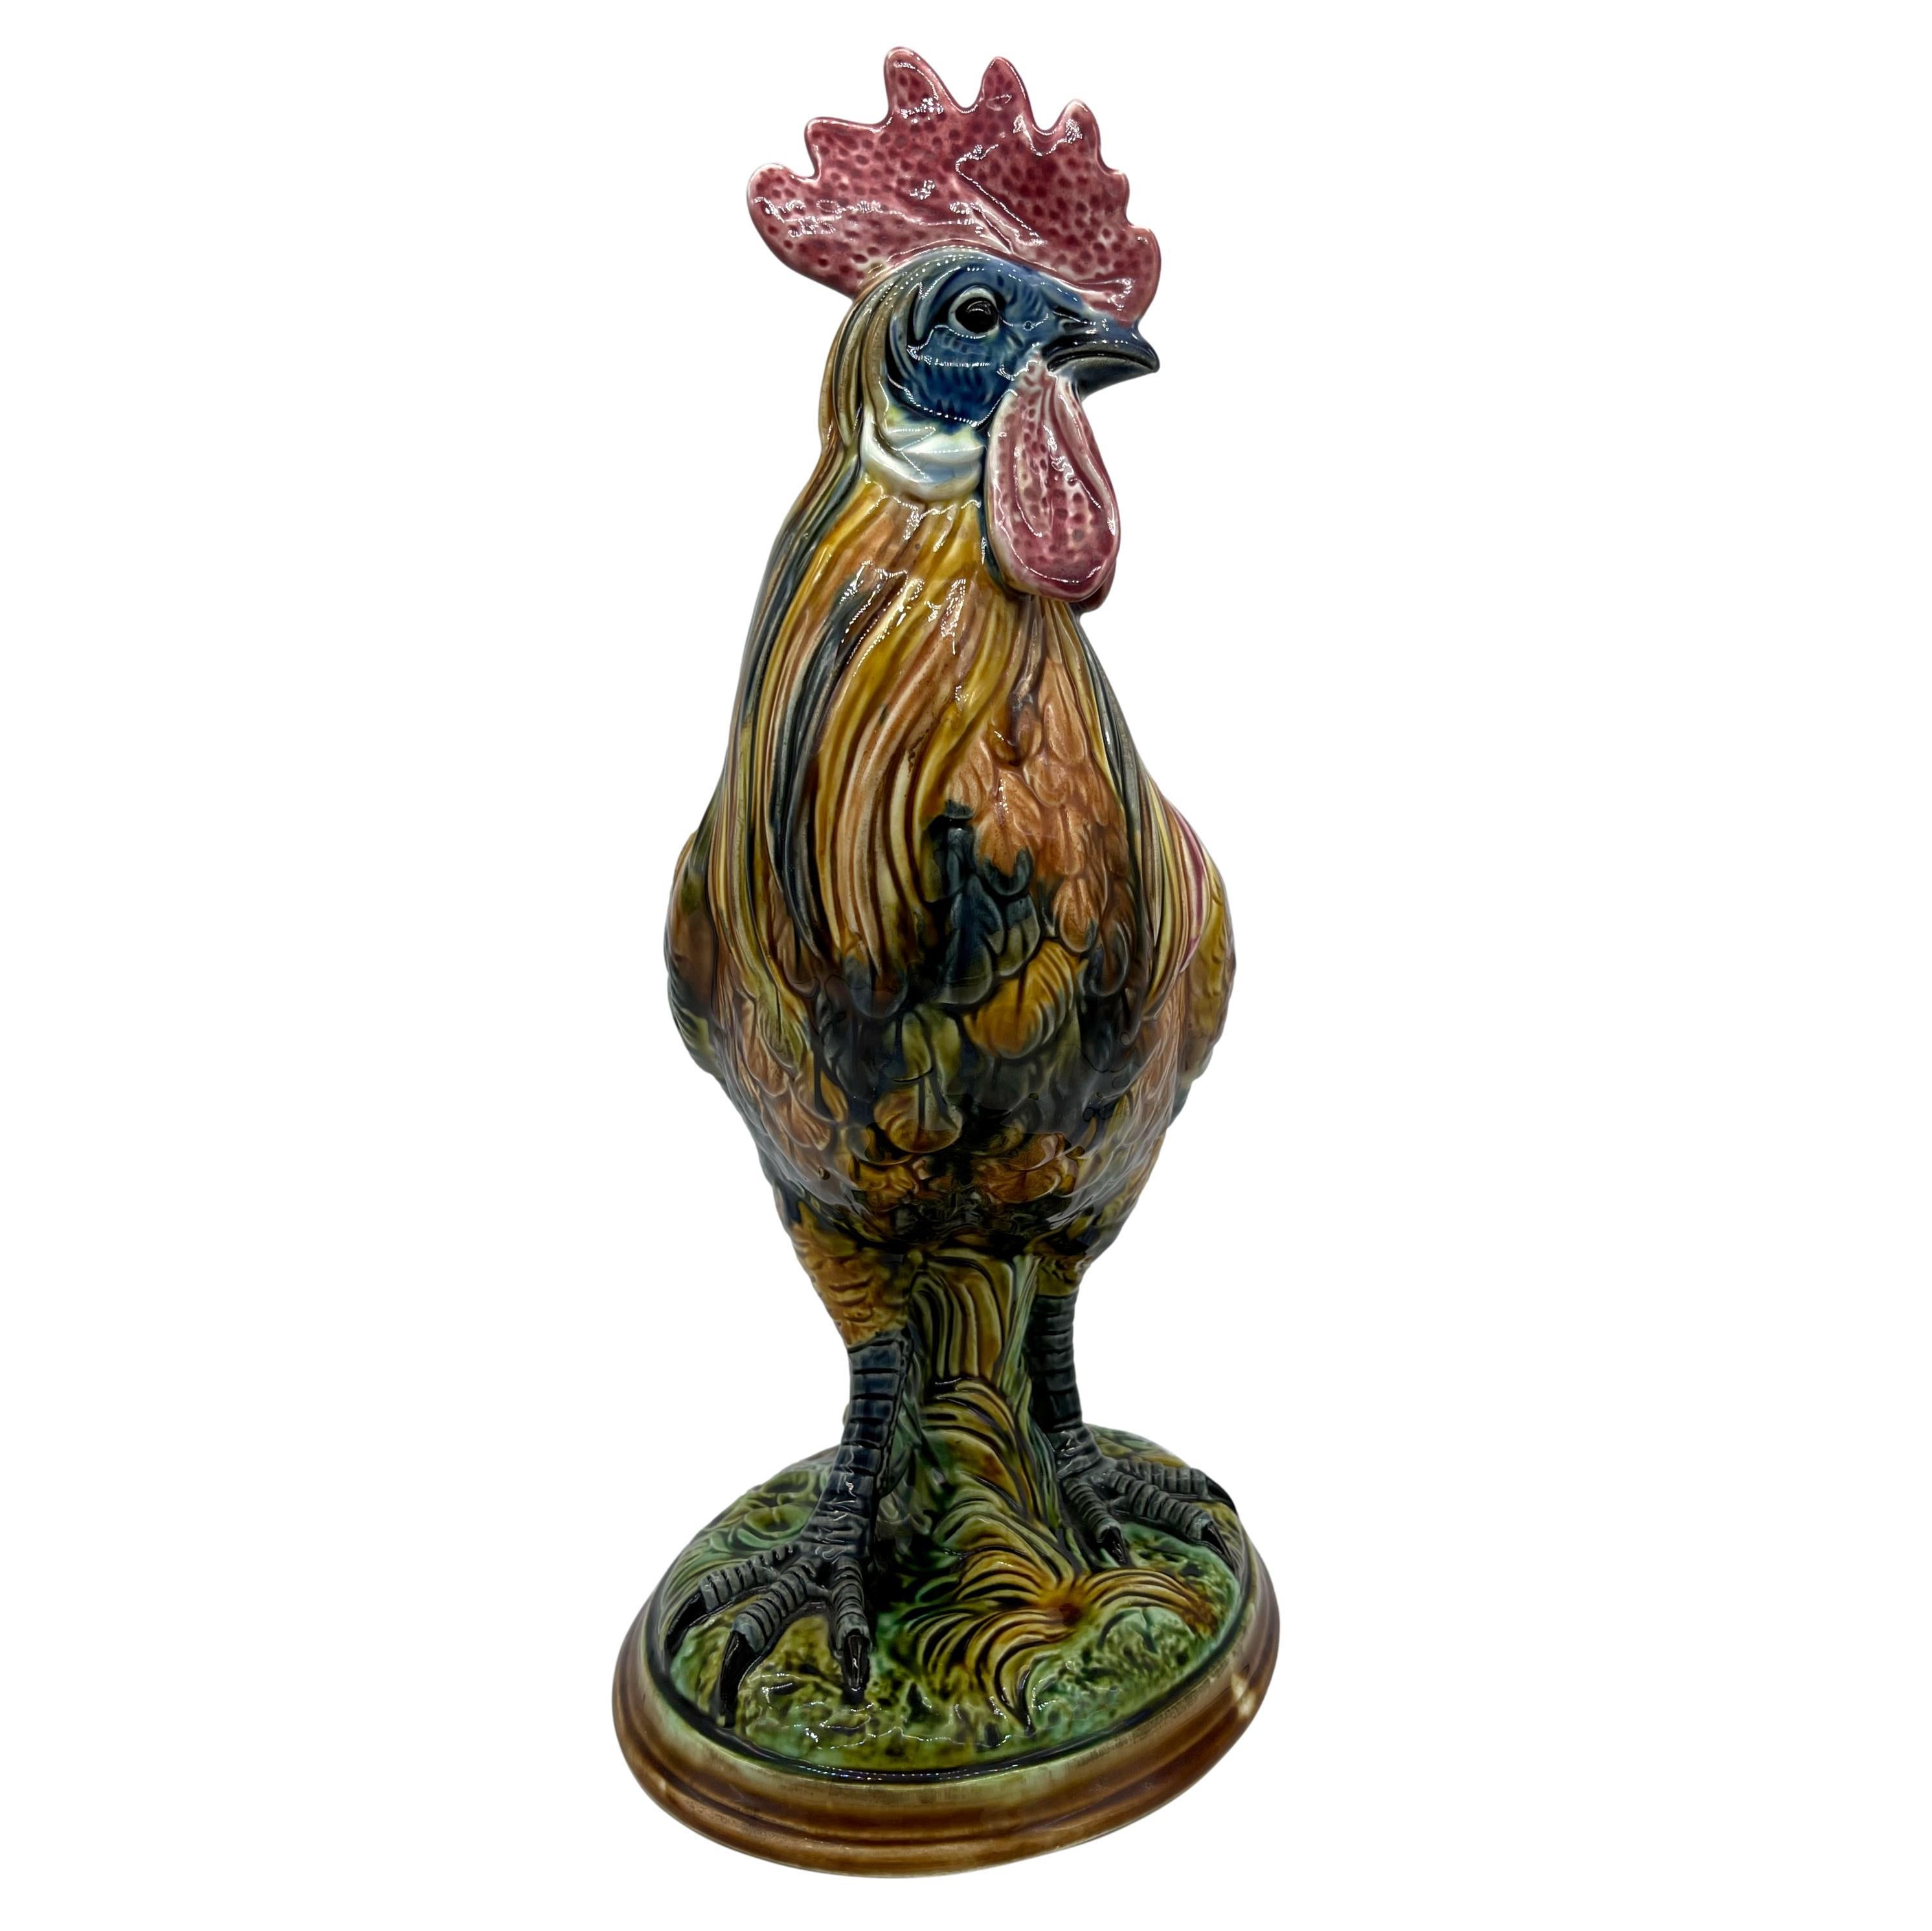 Molded German Majolica Figural Rooster by Riedel Von Riedelstein, Dallwitz, ca. 1885 For Sale